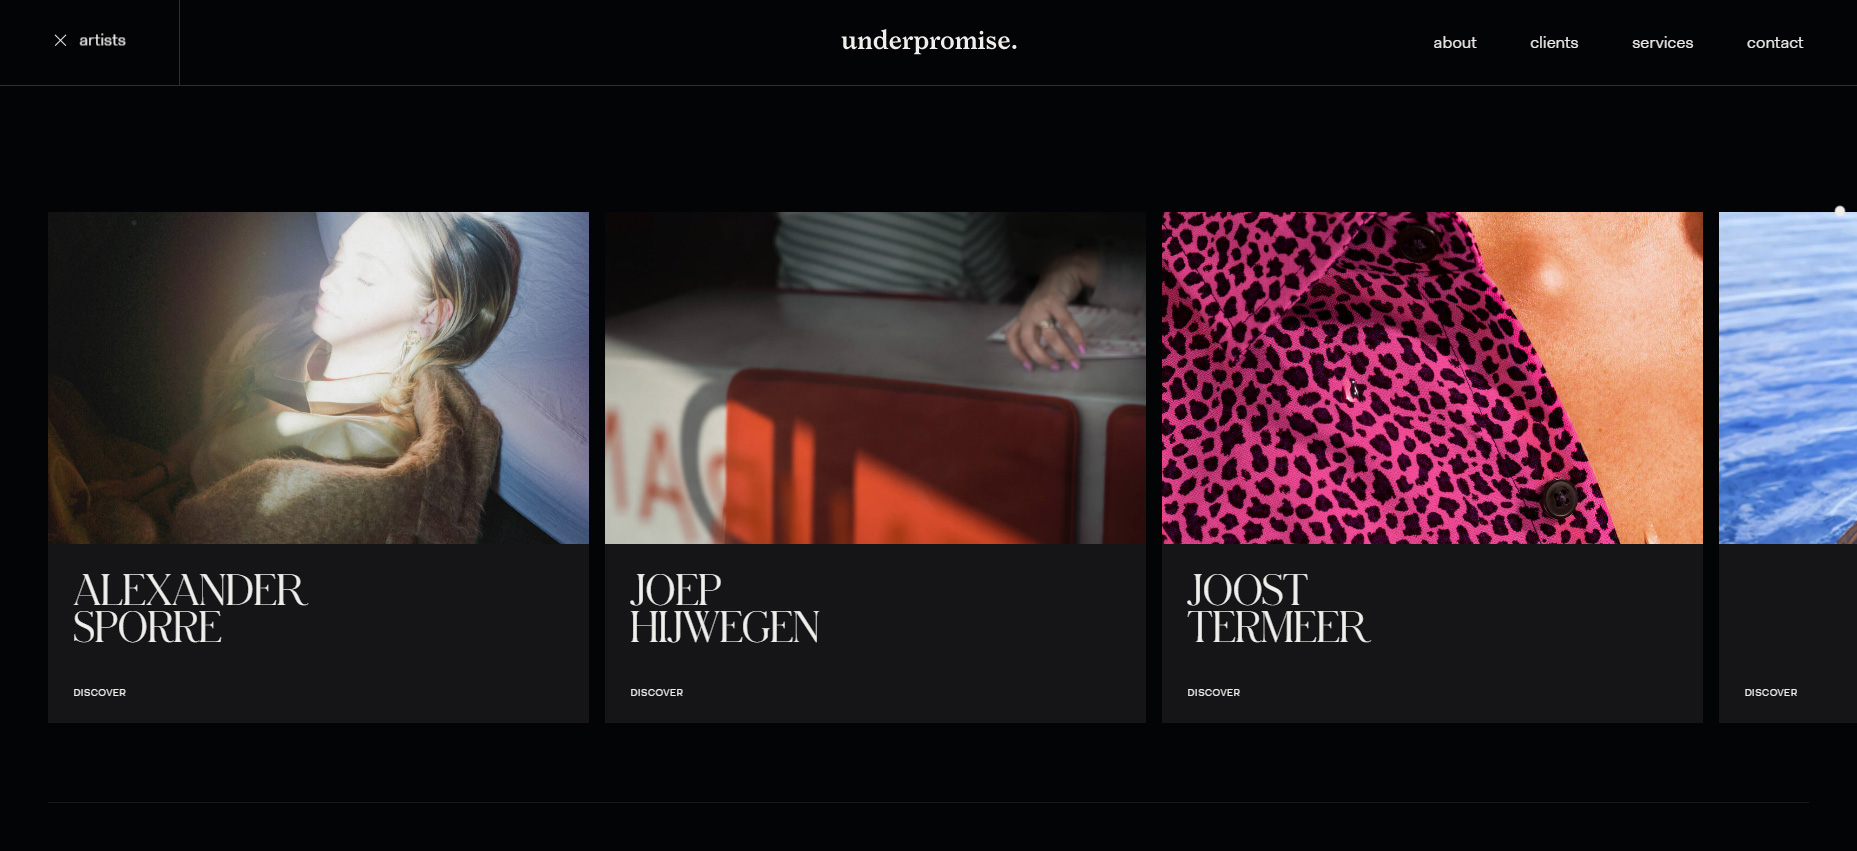 underpromise - Website of the Day